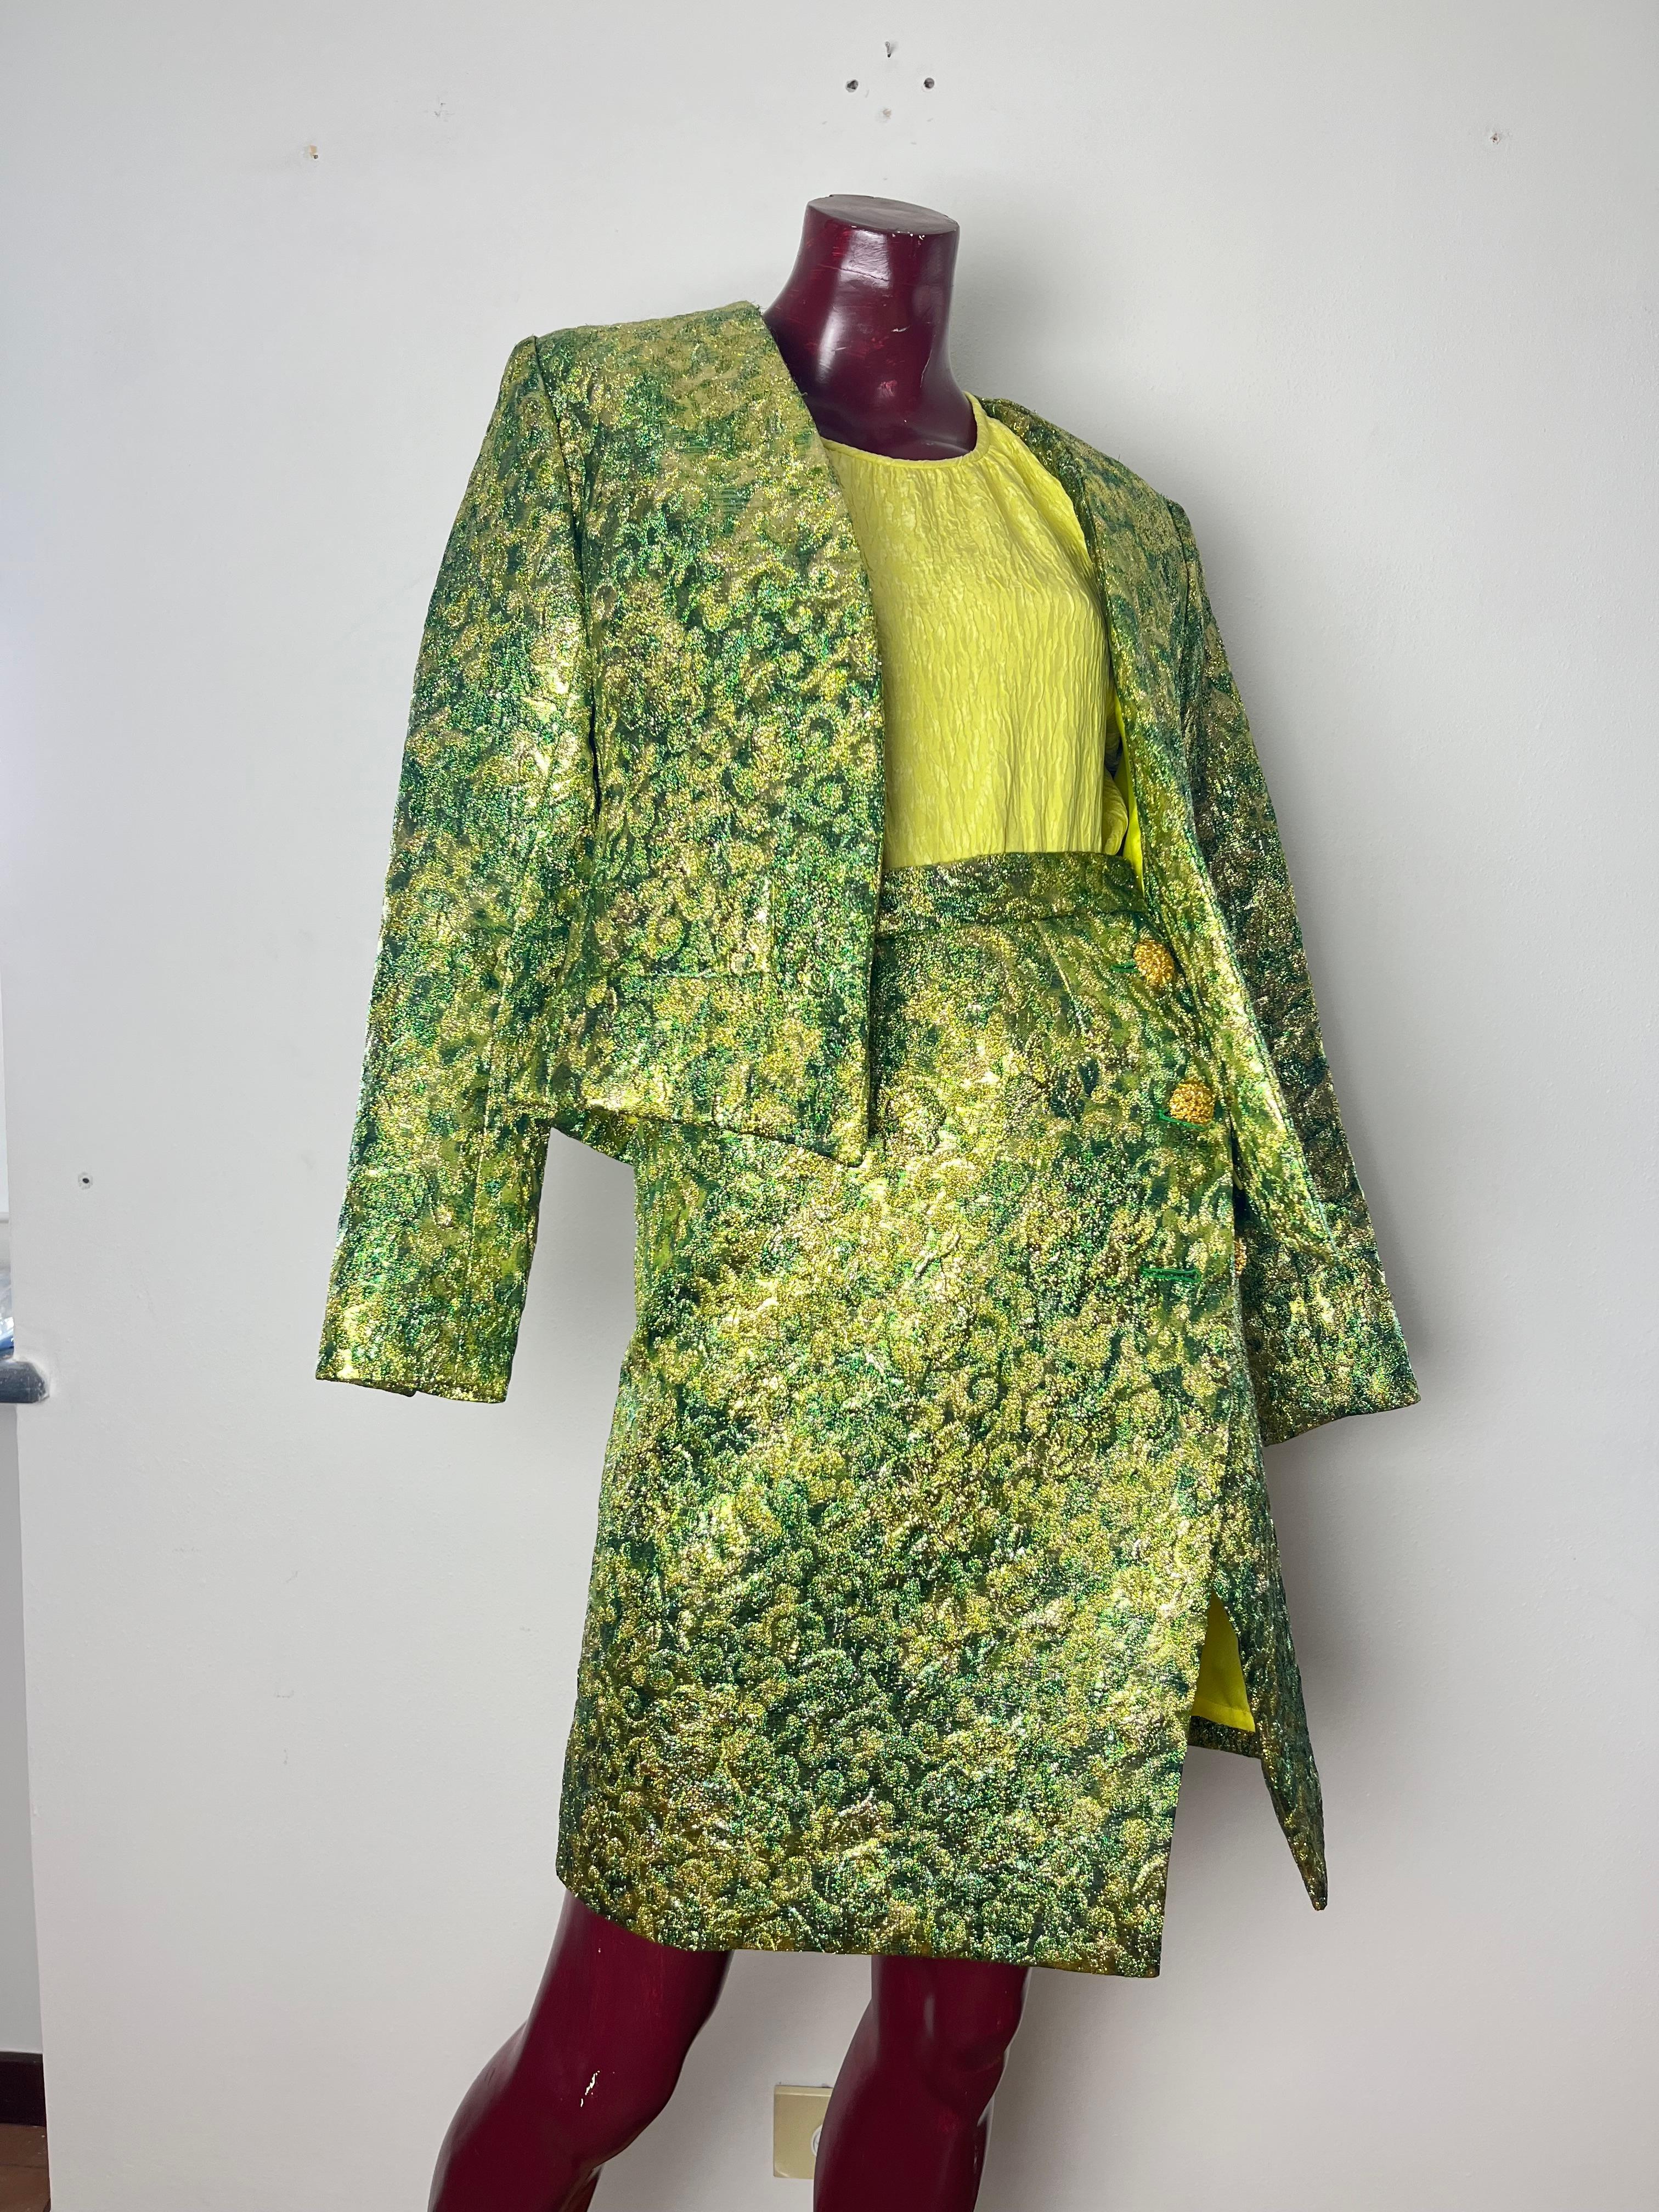 Yves saint laurent rive gauche , jacket and skirt set with matching shirt 

the short blazer over the hips without buttoning and spikes on the front in green/yellow brocade fabric with two gold jeweled buttons on the cuffs

the high-waisted